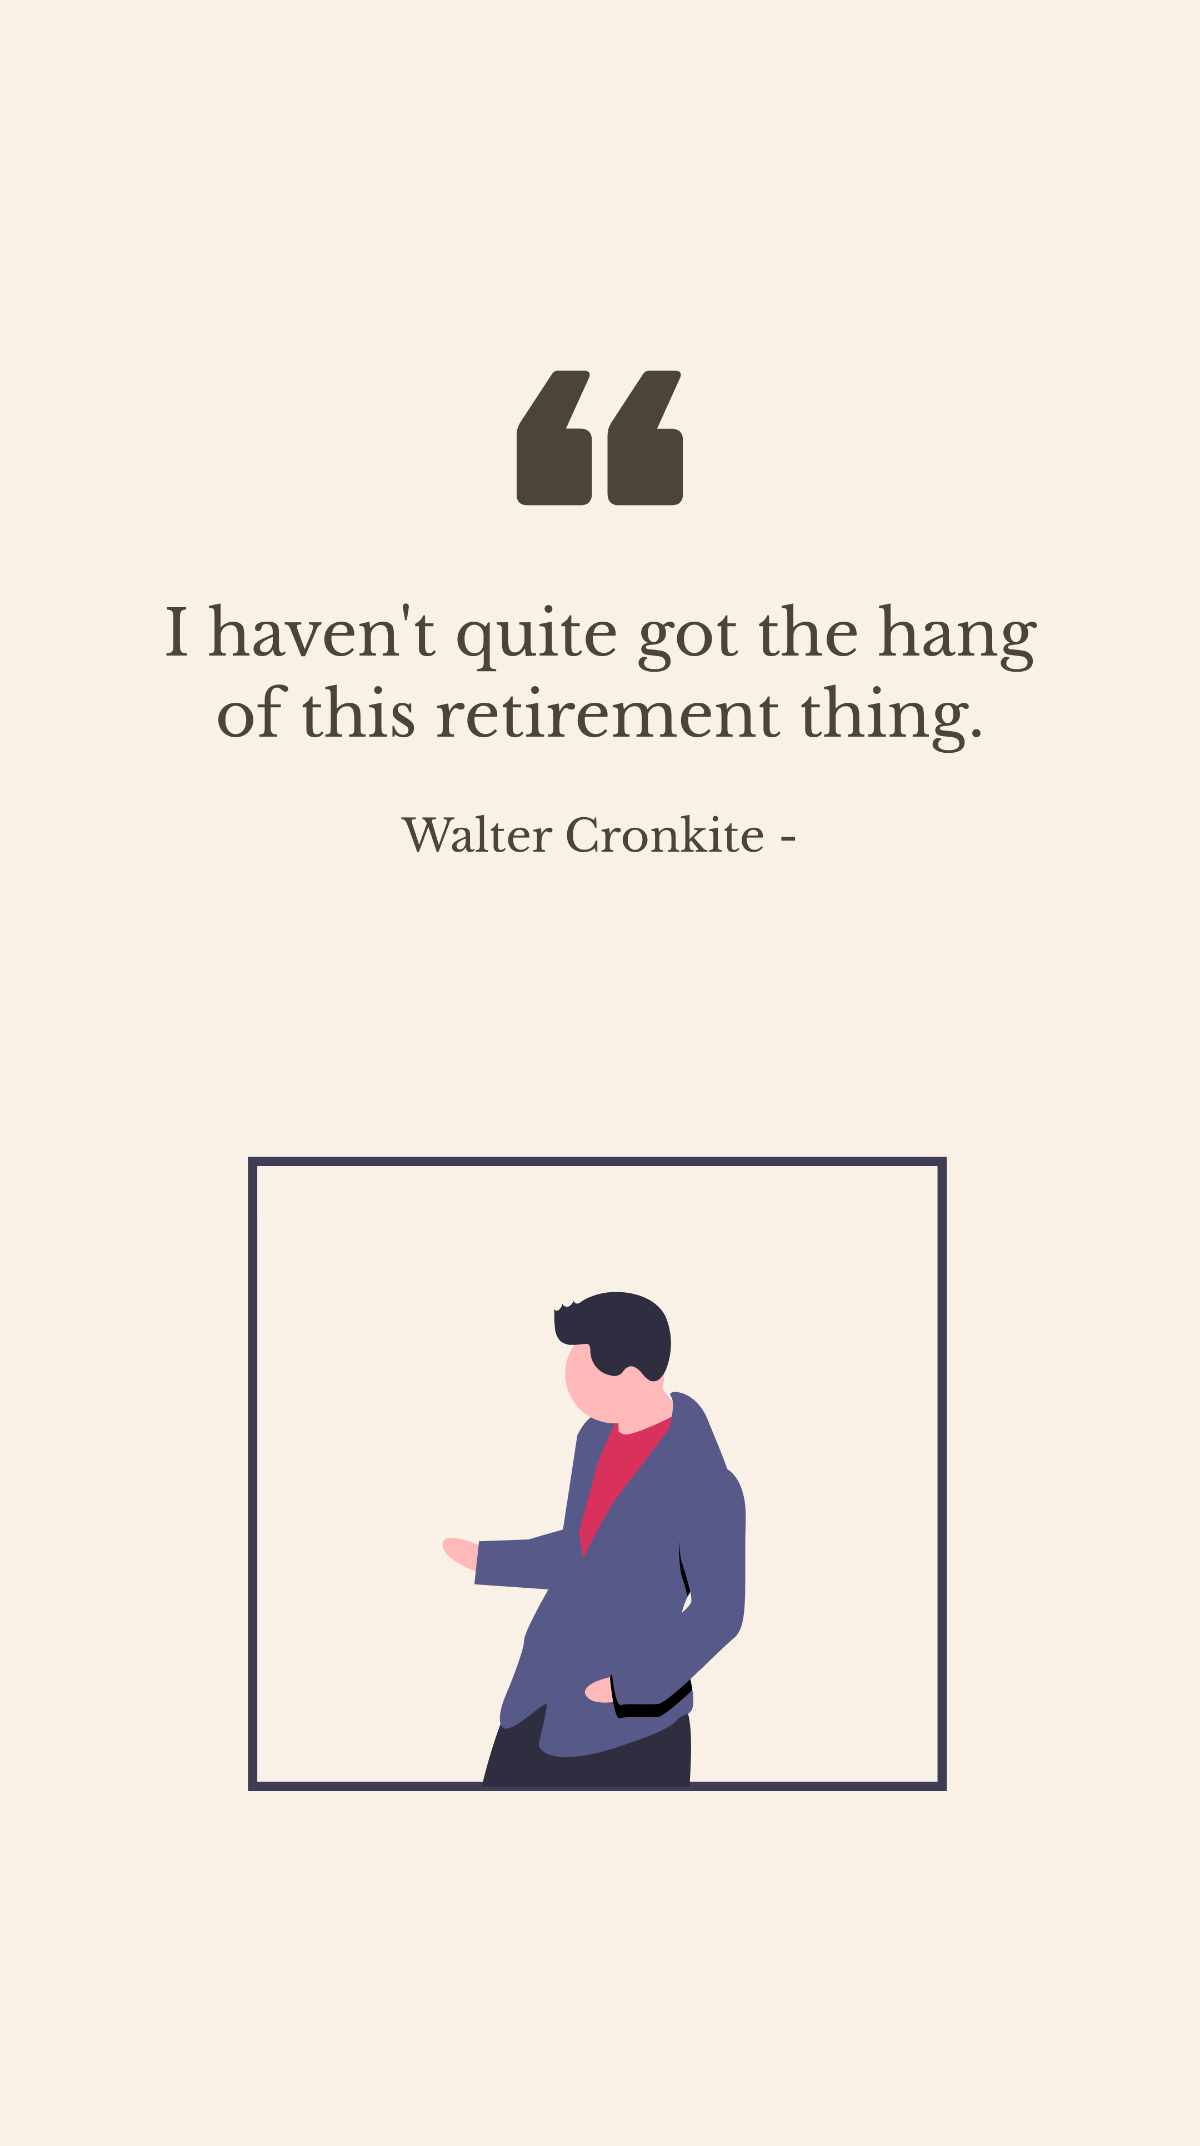 Free Walter Cronkite - I haven't quite got the hang of this retirement thing. Template